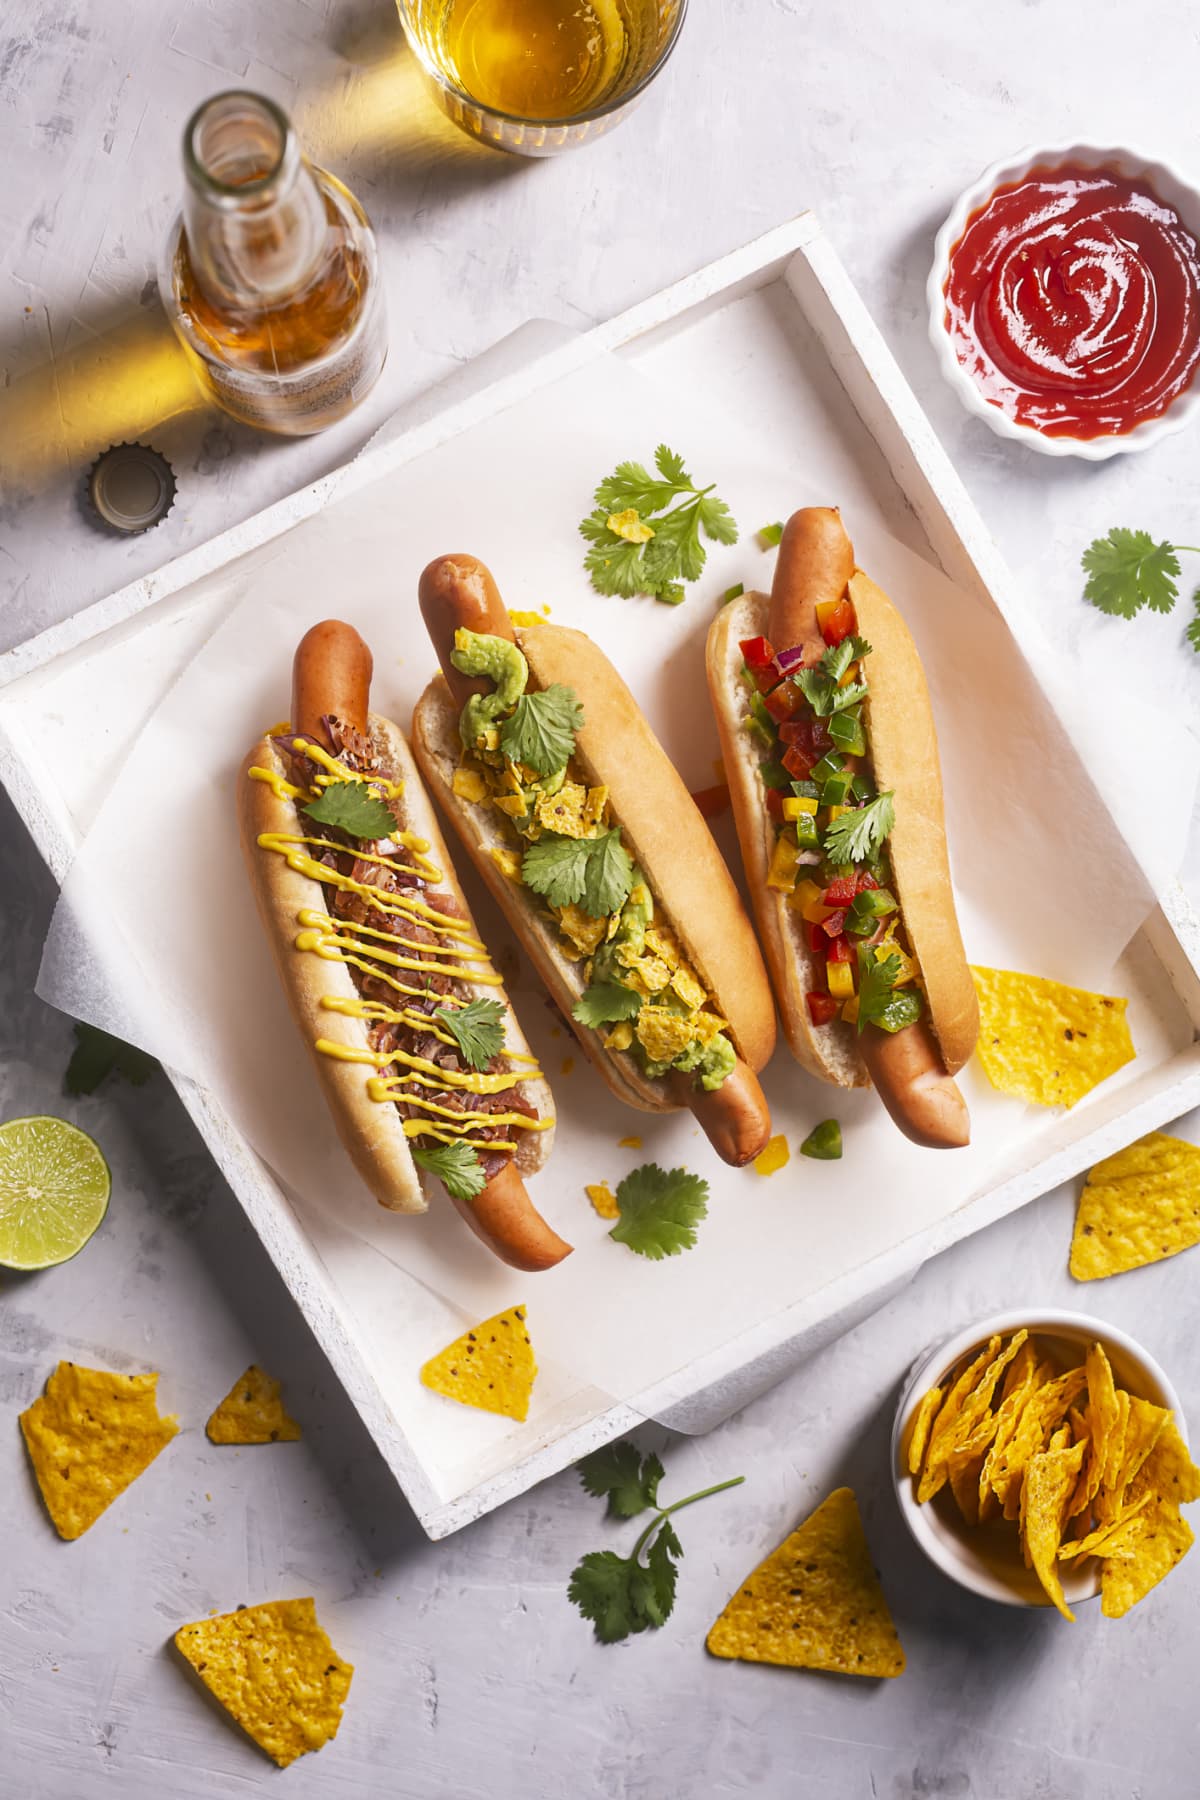 Hot dogs with different spicy toppings and mexican nachos, beer. Top view